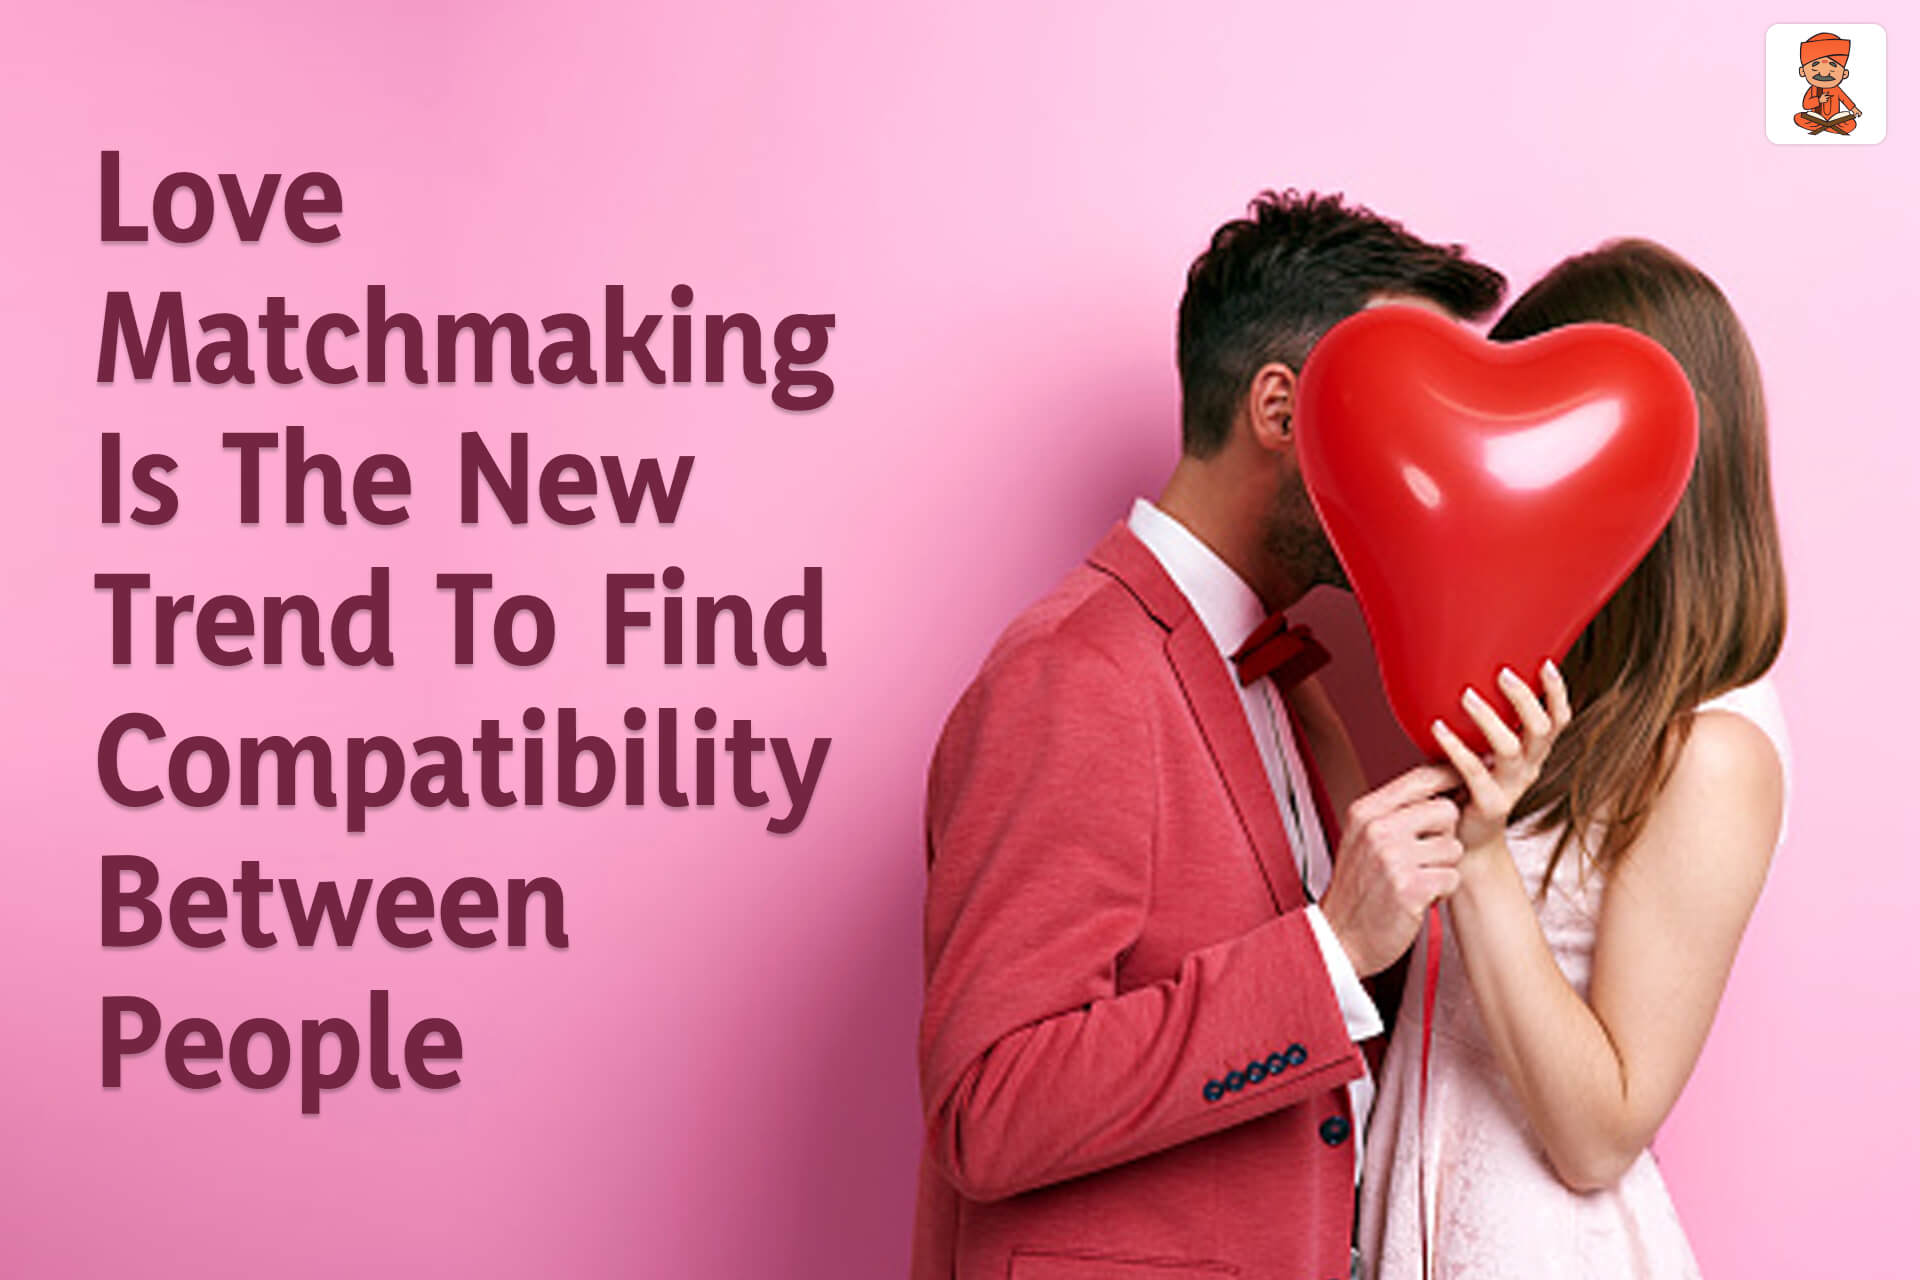 Love Match Making Is The New Trend To Find Compatibility Between People